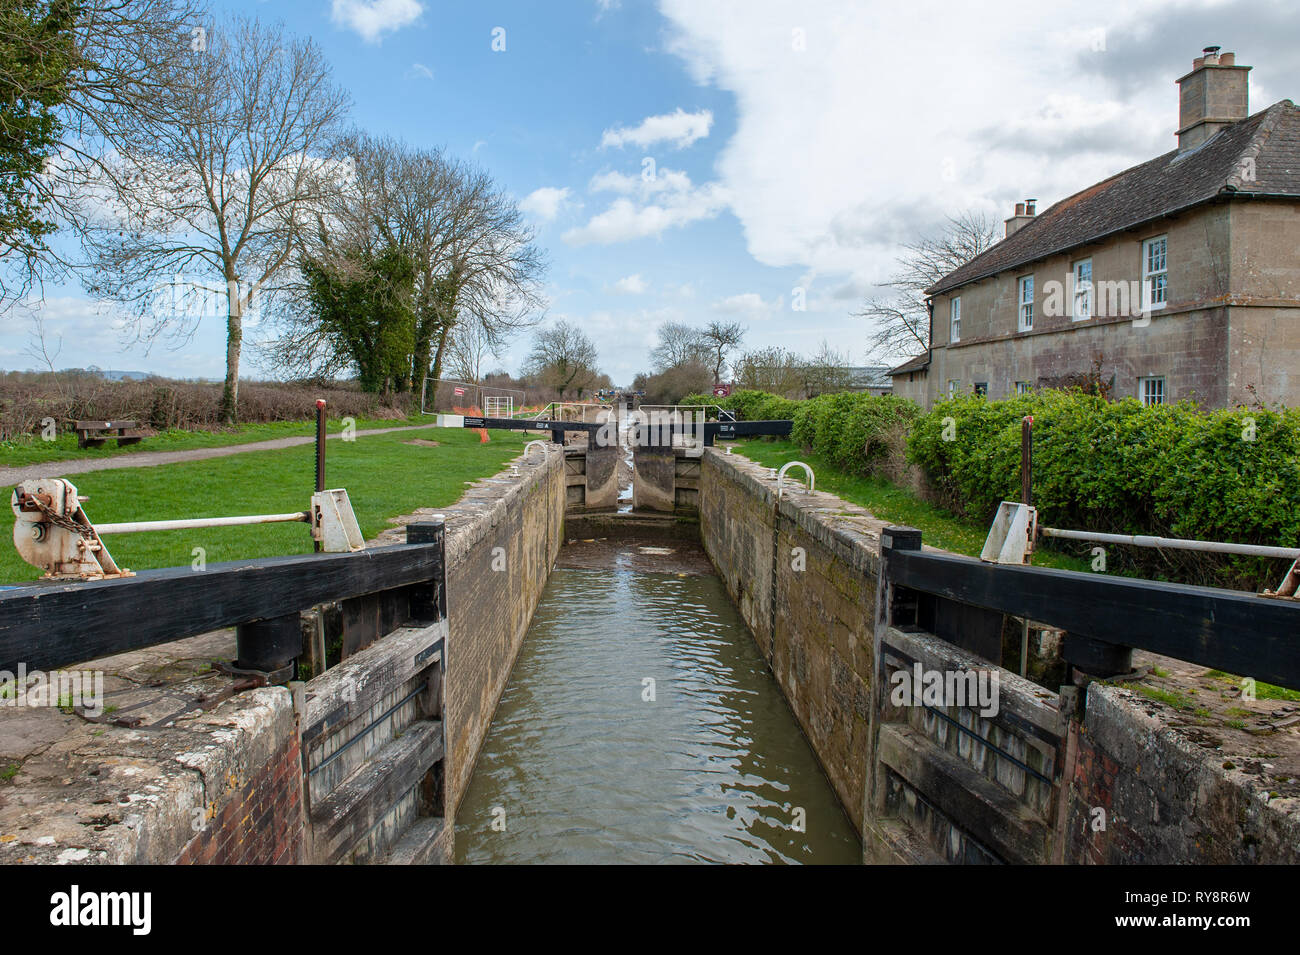 Lock 15 on Kennet and Avon Canal, Semington, Wiltshire, UK. Open at both ends showing the drained pound before lock 16 which is undergoing repair work. Stock Photo